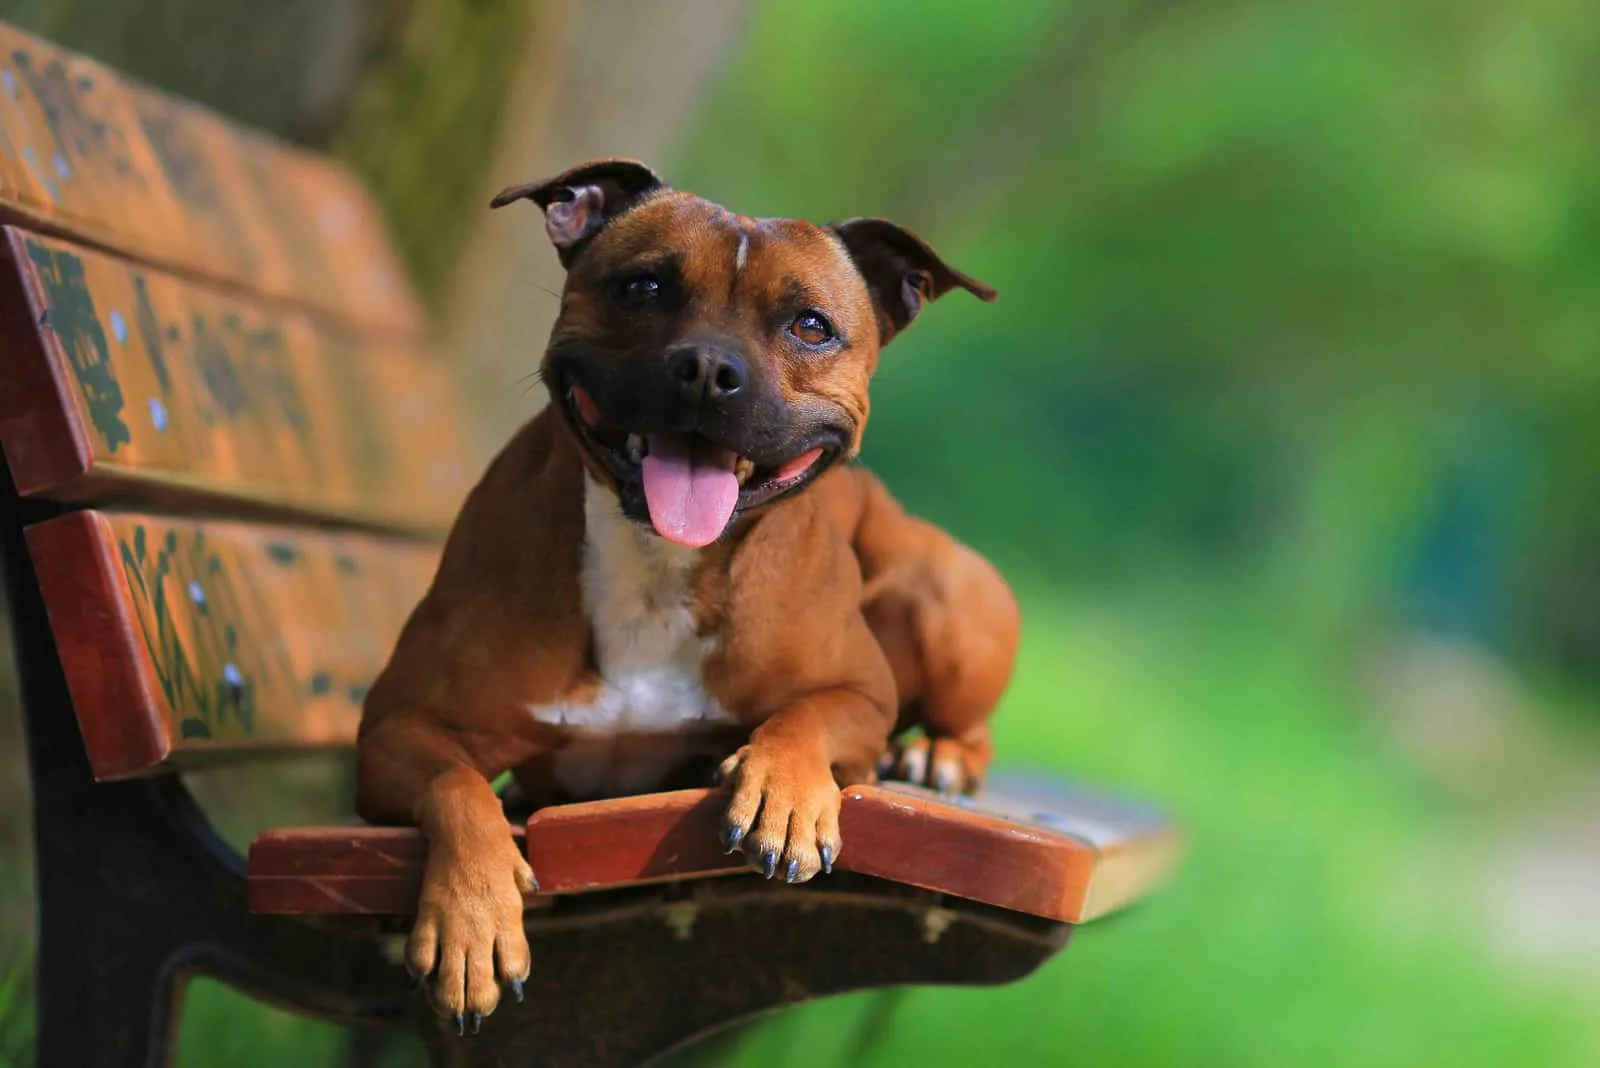 Staffordshire Bull Terrier lying on a bench